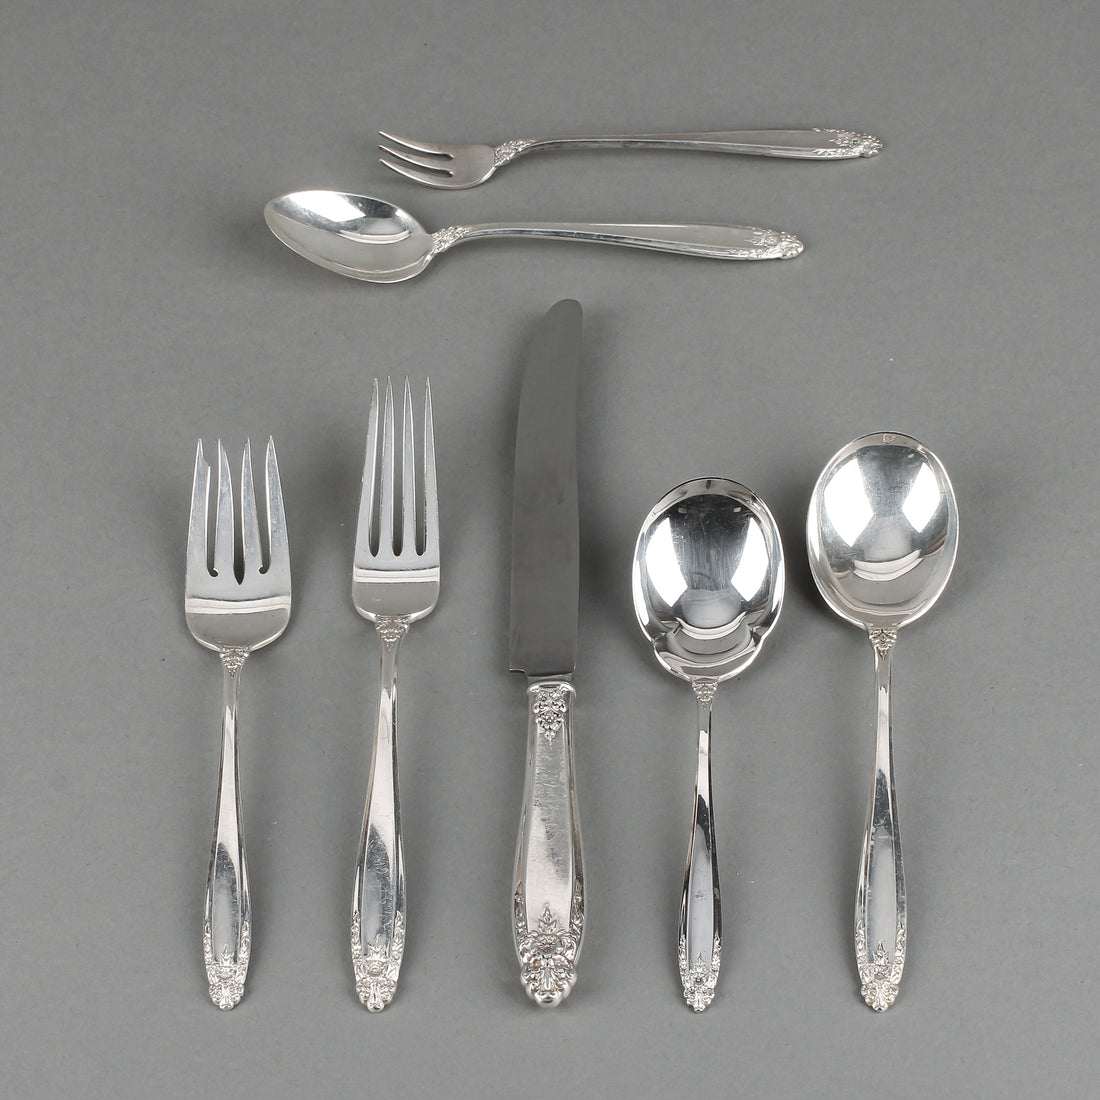 INTERNATIONAL Prelude Sterling Silver Luncheon Flatware - 11 Place Settings +